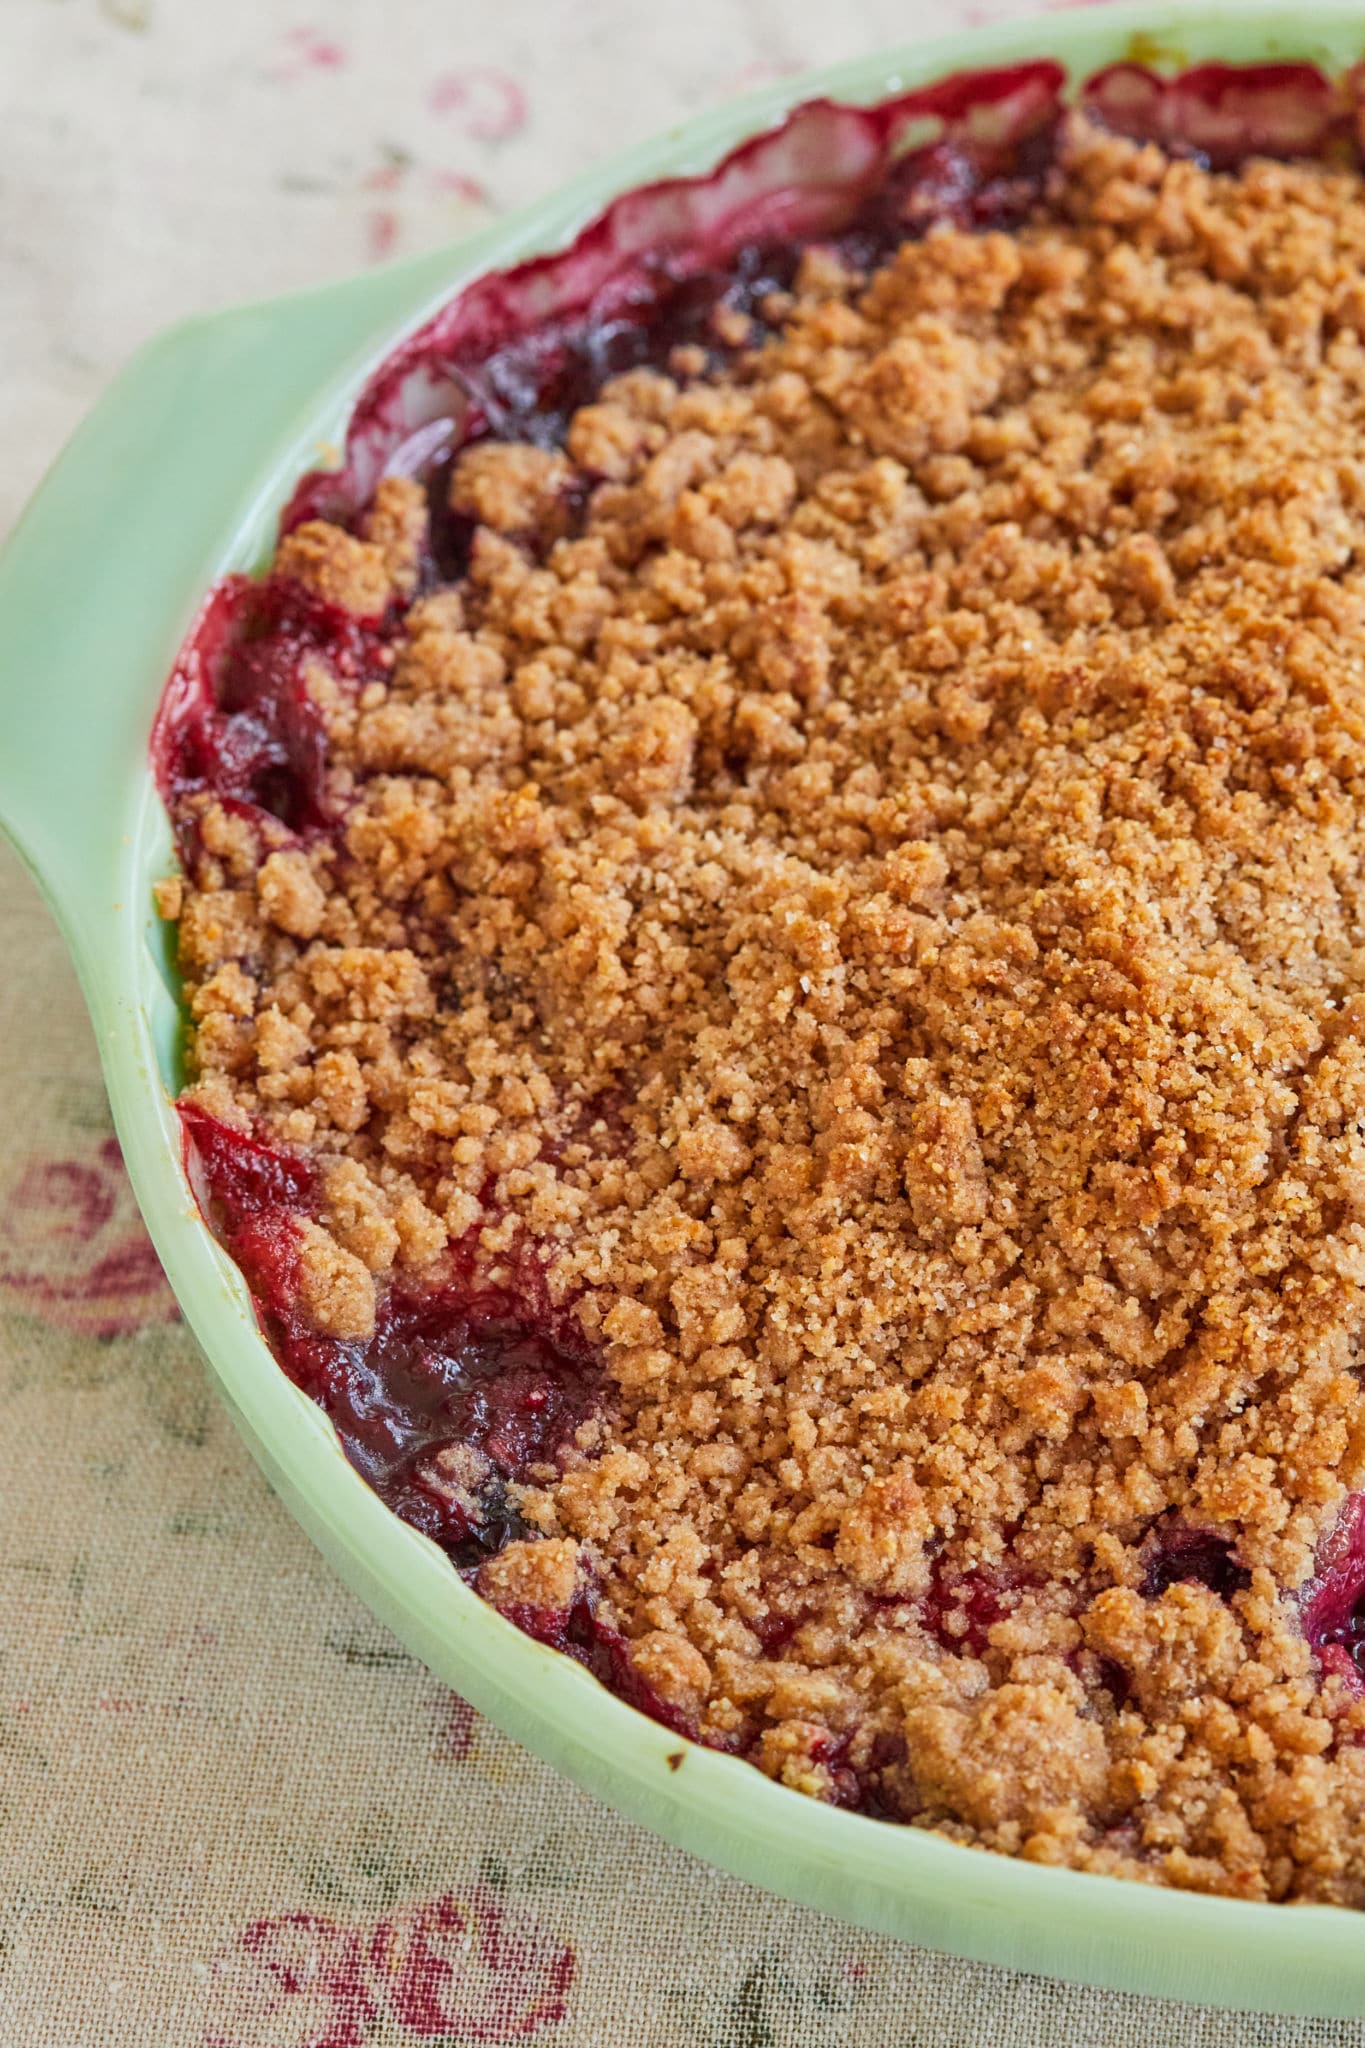 A look at the summer berry crisp topping.